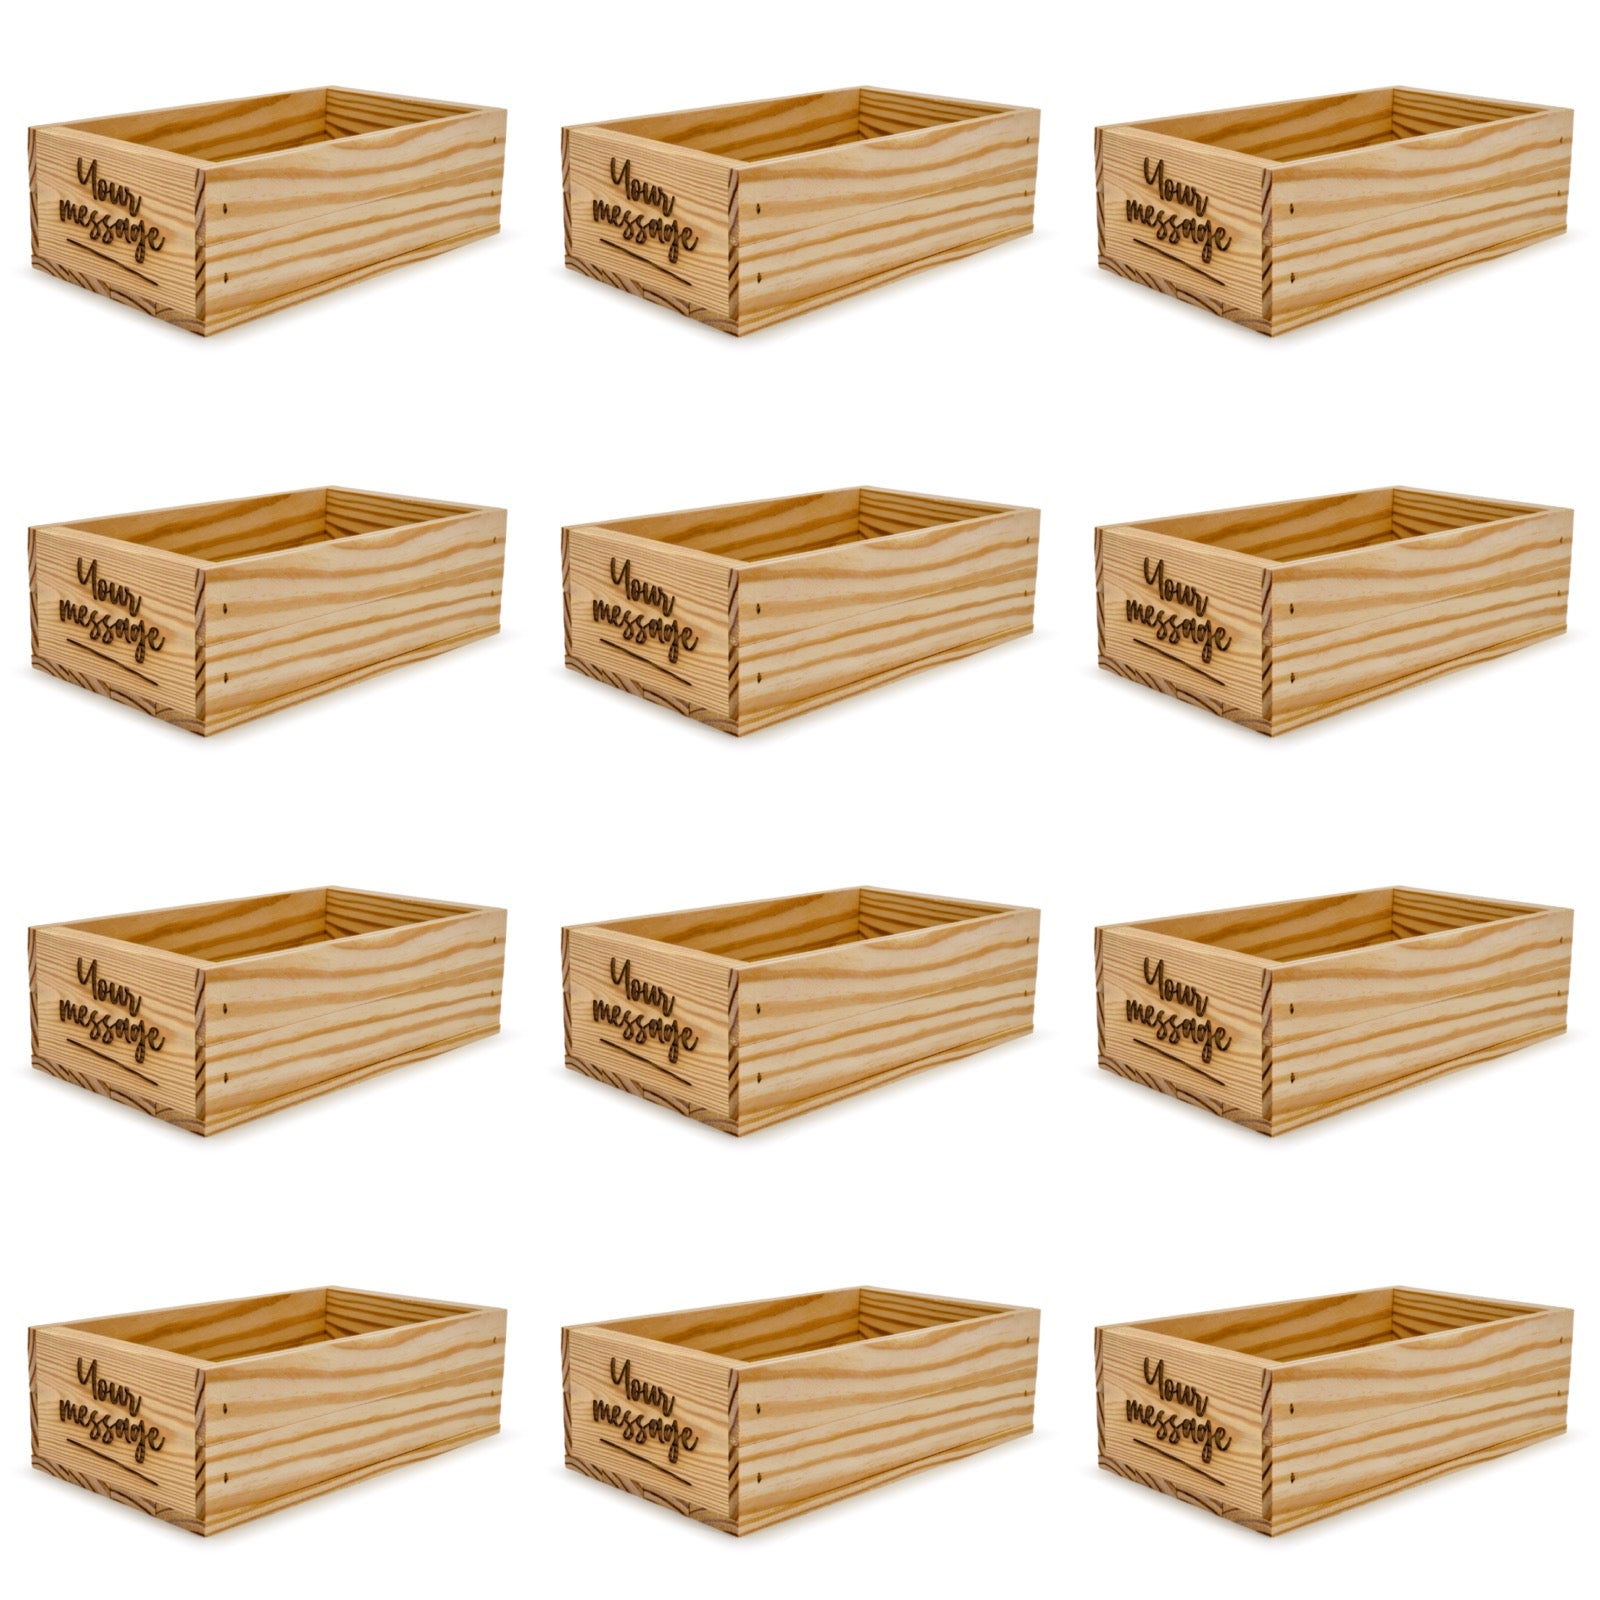 12 Small wooden crates with custom message 11x6.25x3.5